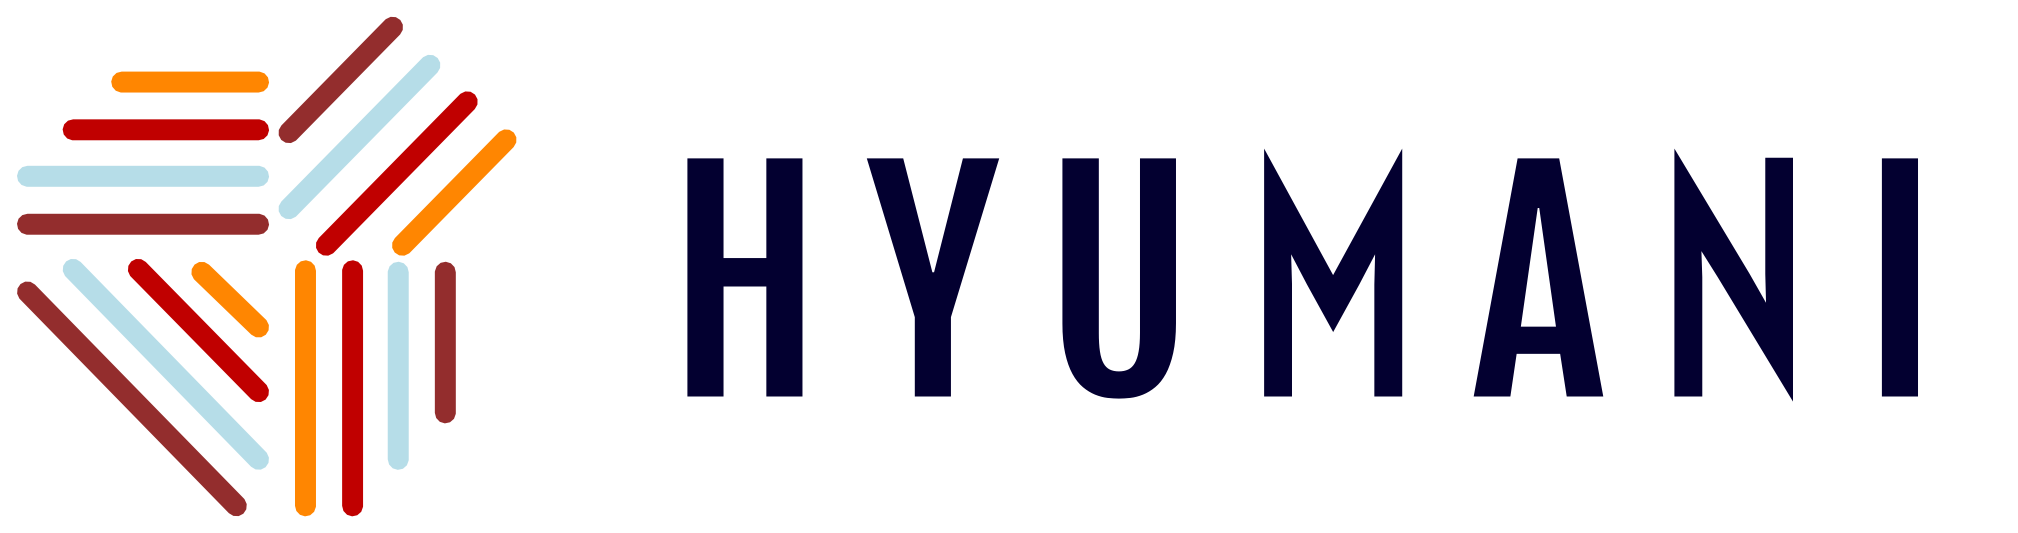 hyumani.com - solution for anger management and fear management restricting cult of personality